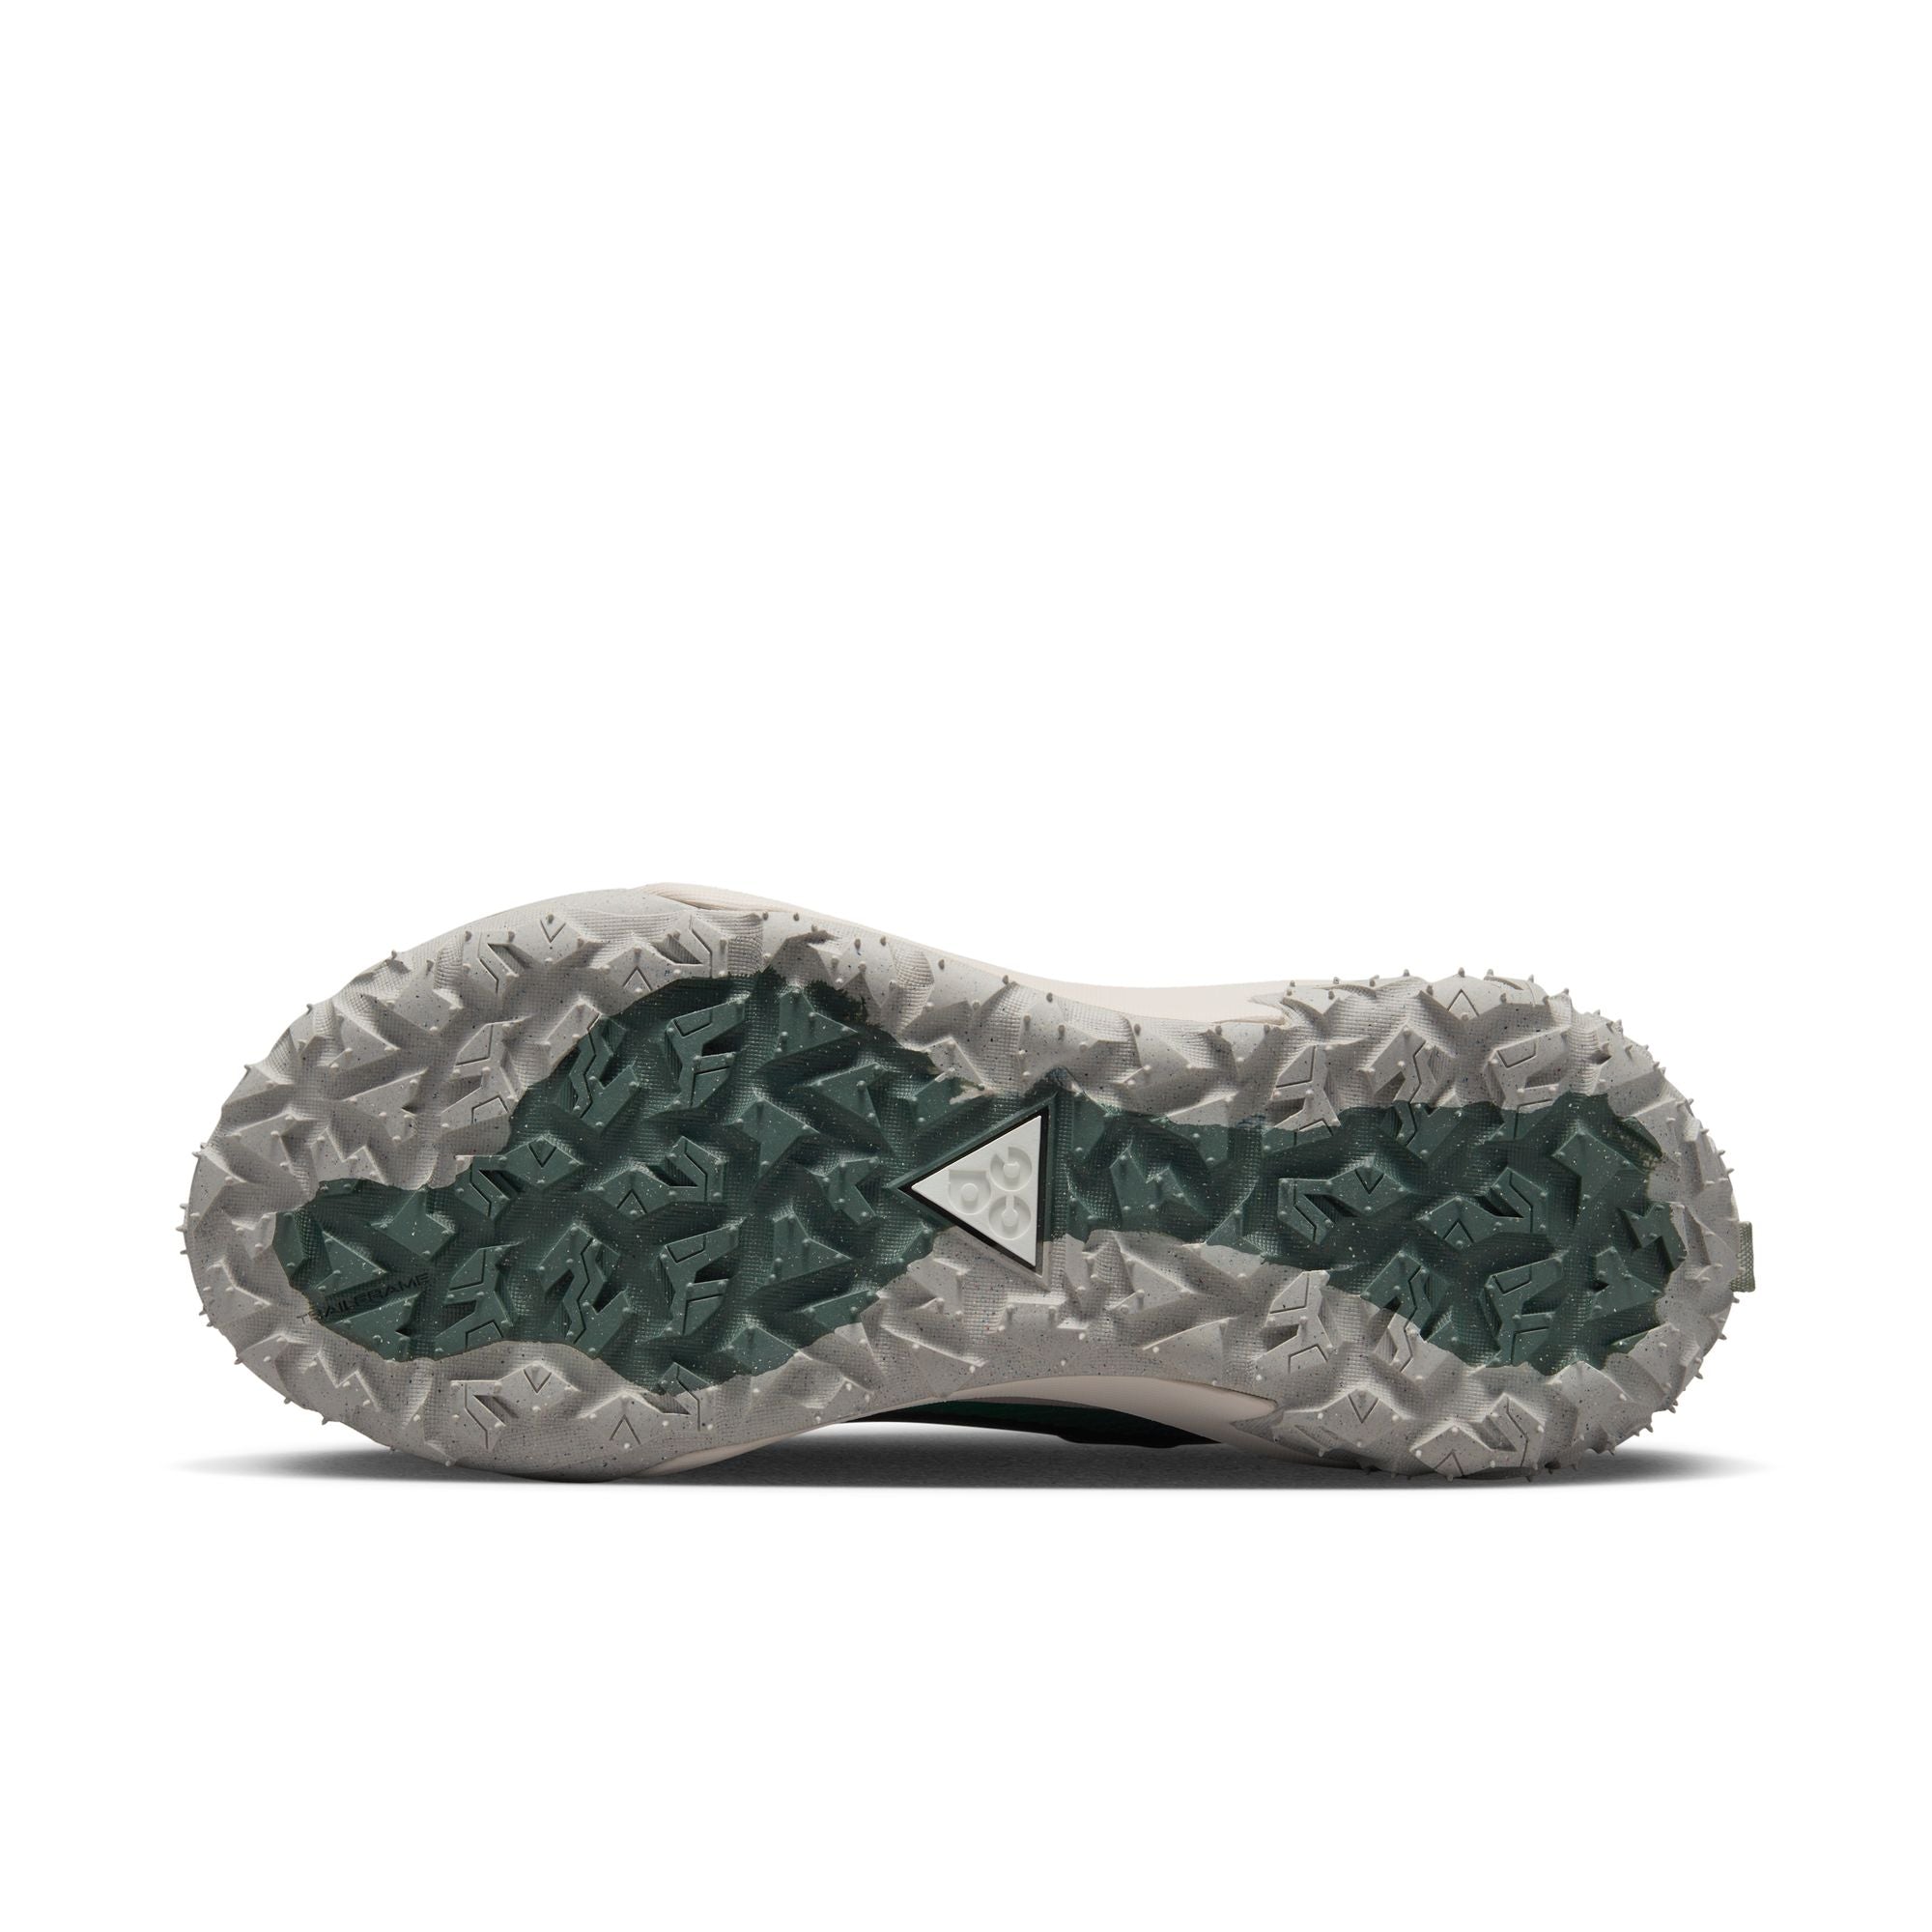 ACG Mountain Fly 2 Low 'Forest Green Grey' - INVINCIBLE